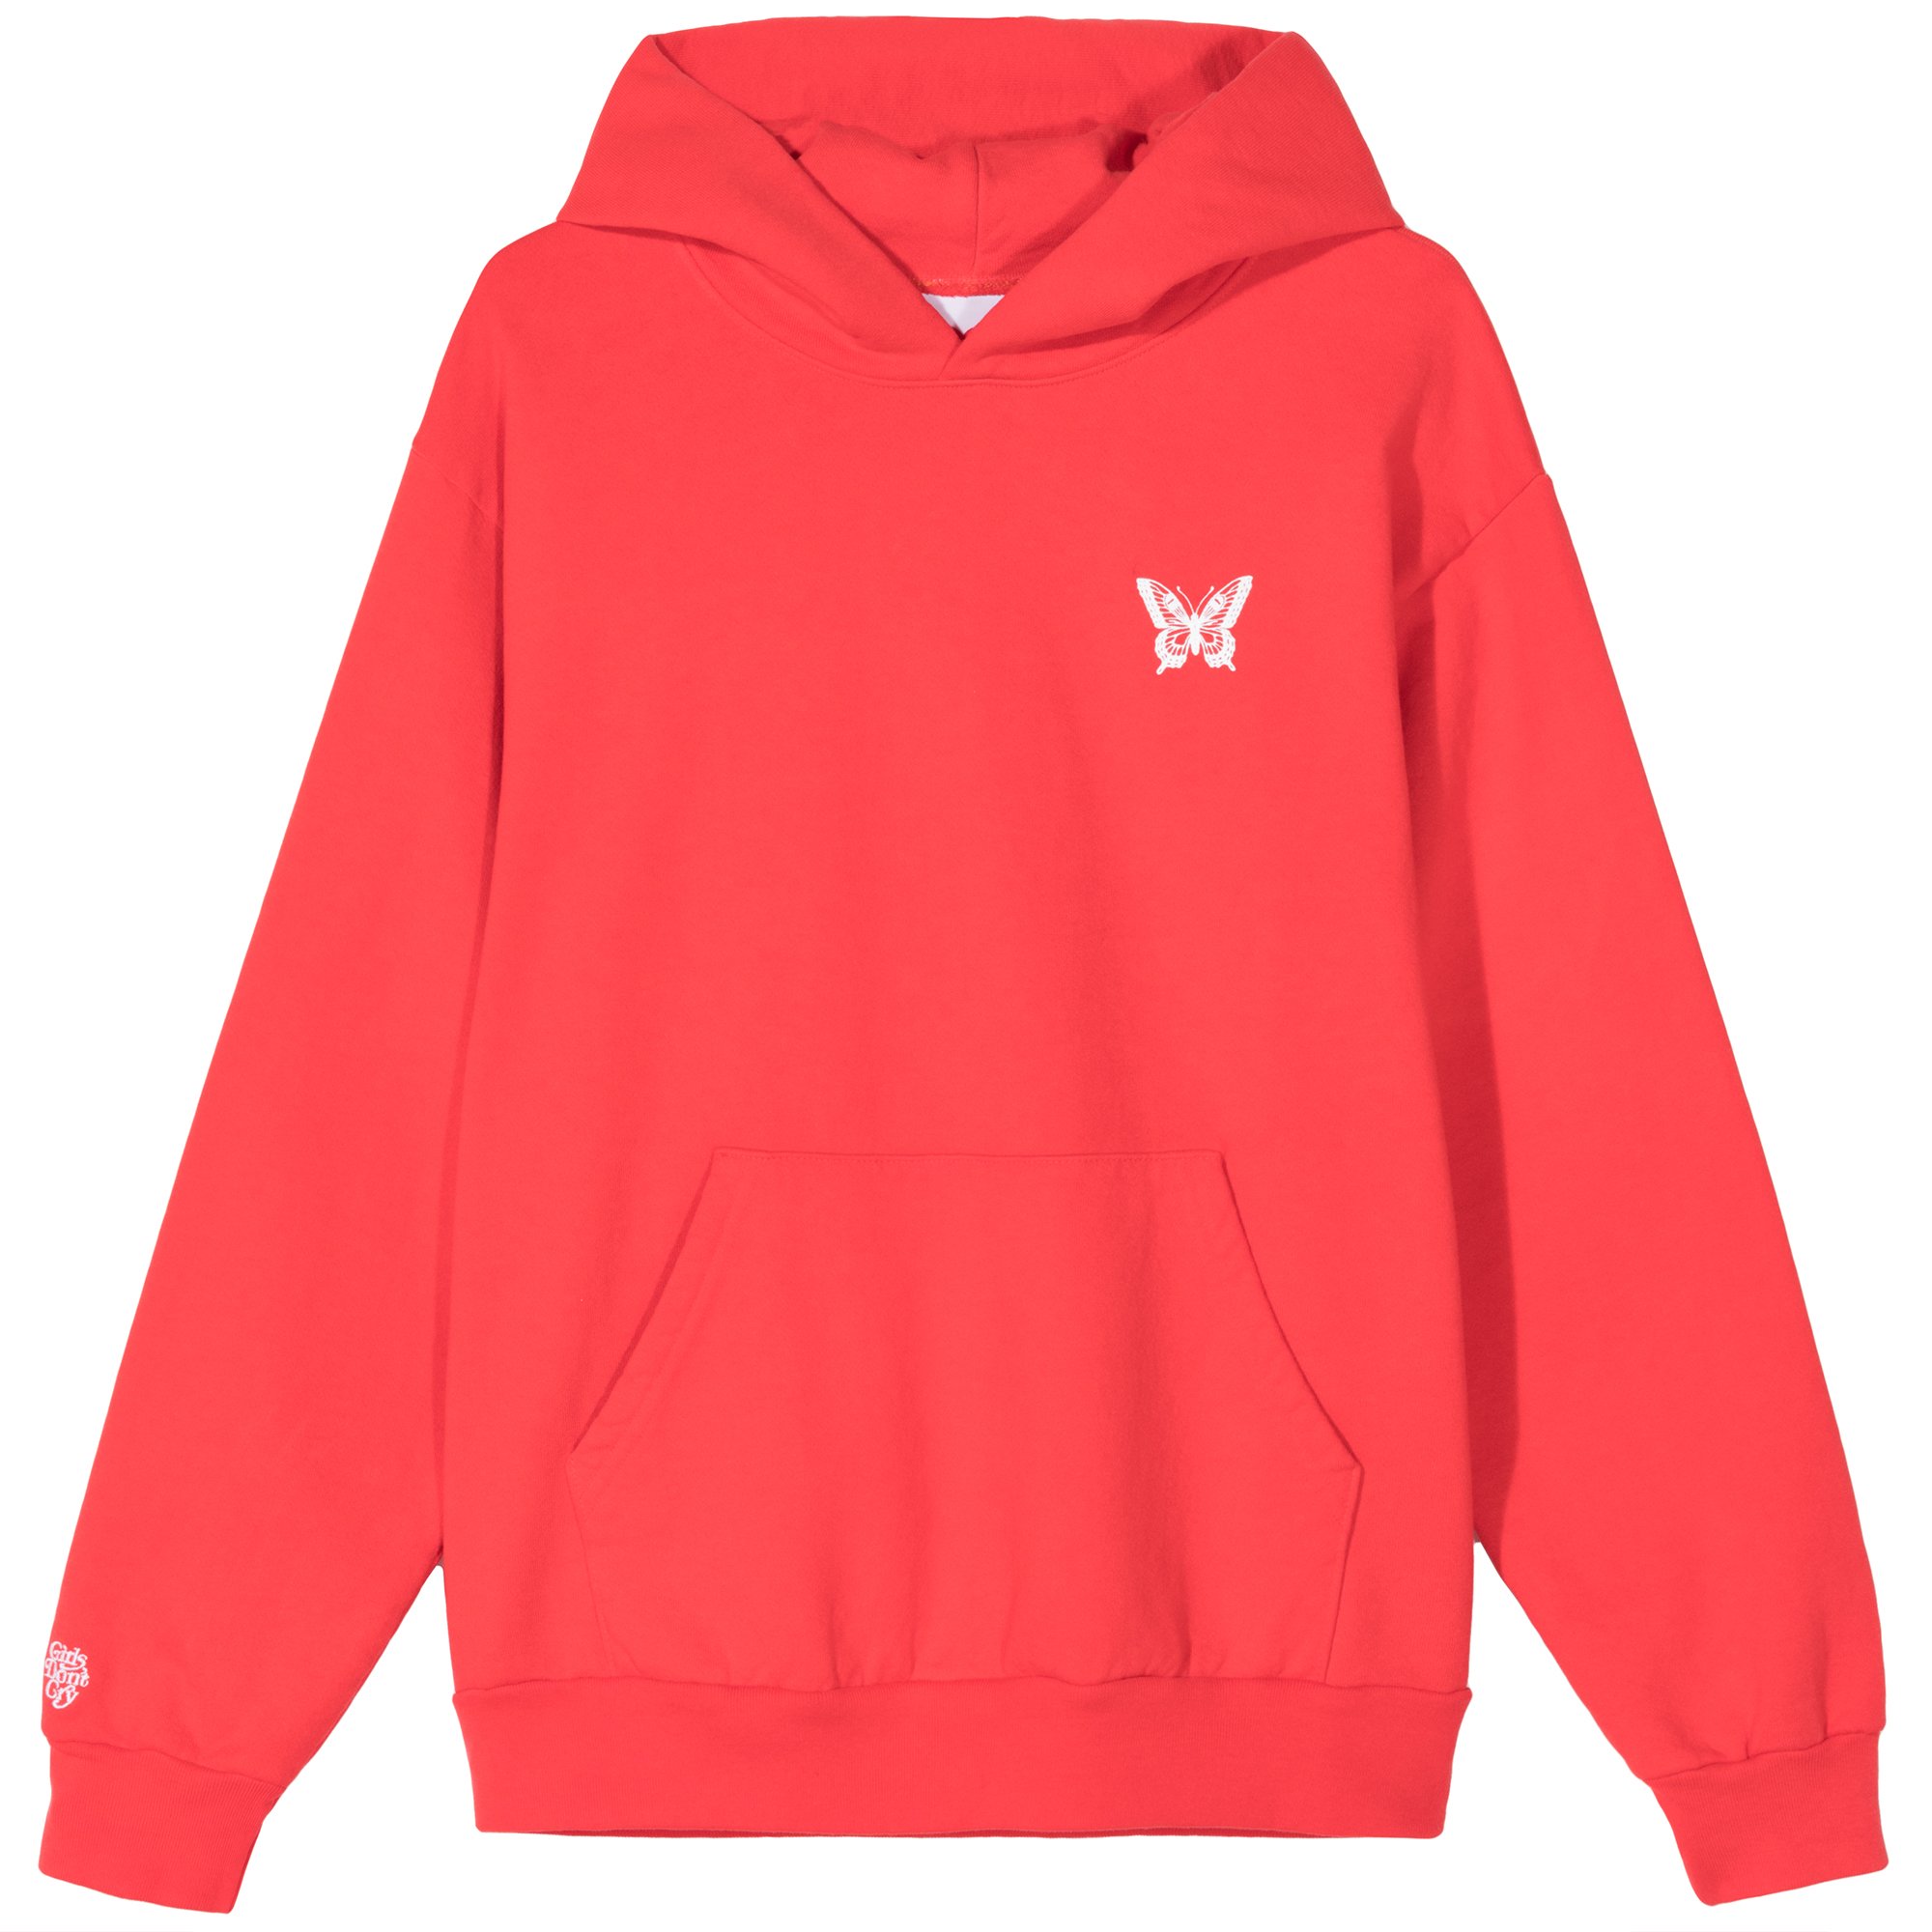 GDC BUTTERFLY HOODY 黒 L Girls Don't Cryパーカー - benjaminstrategy.co